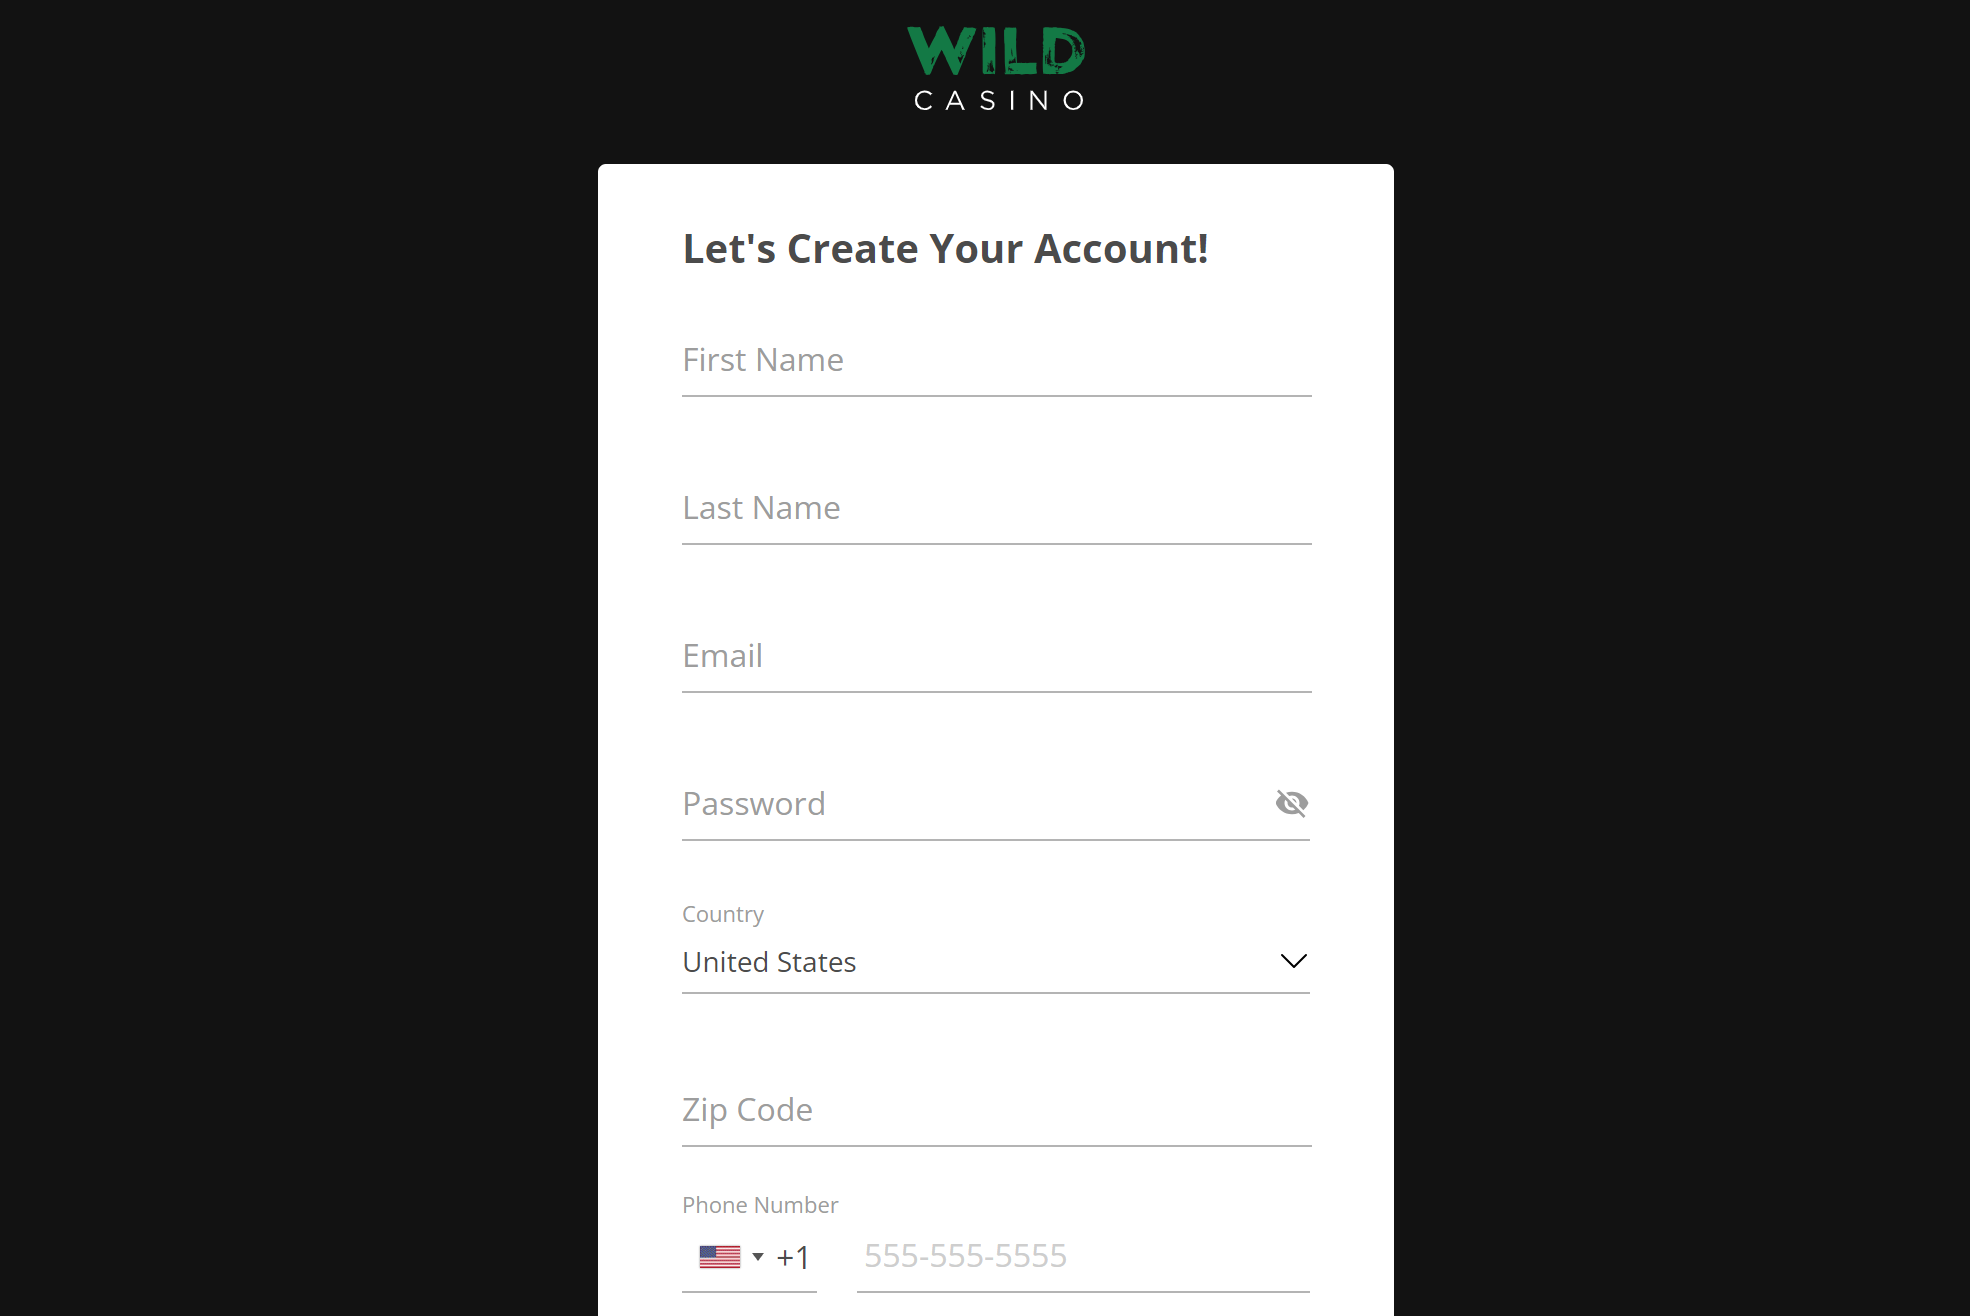 Sign Up for Wild Casino